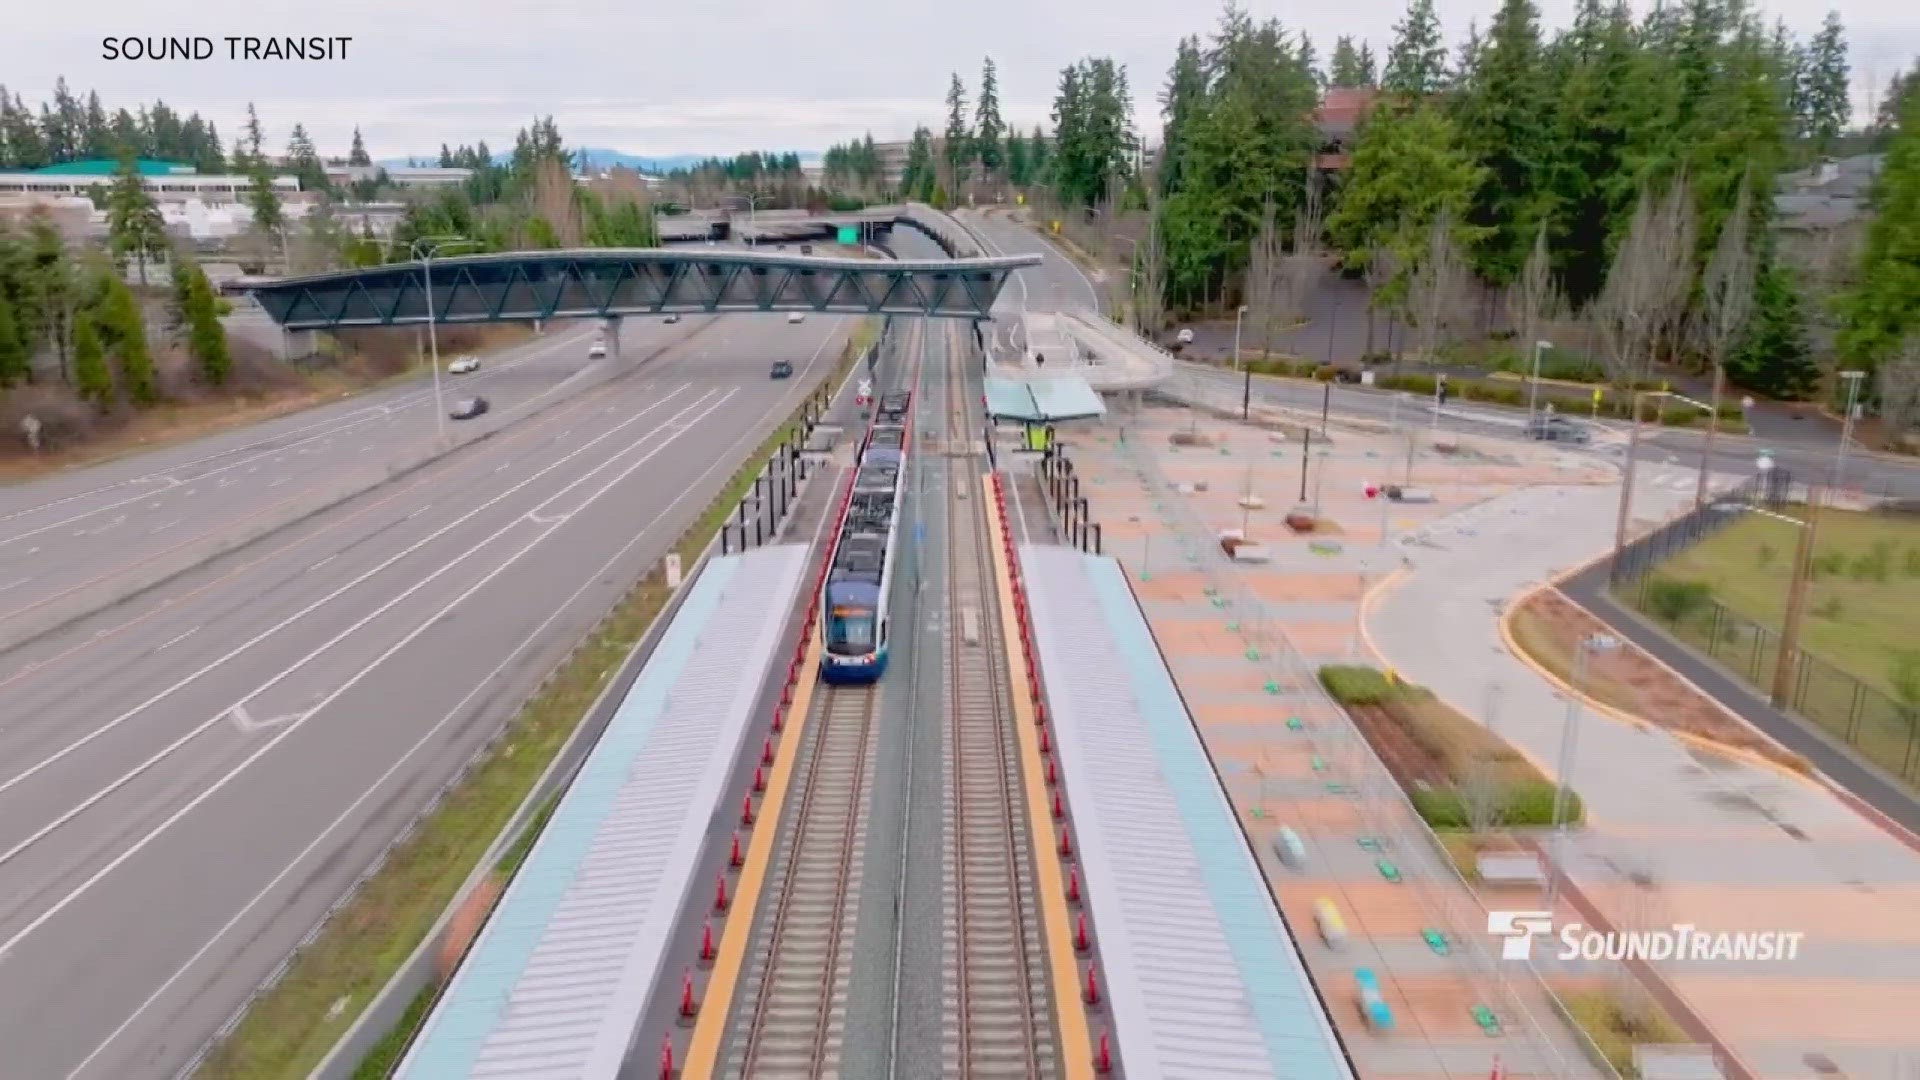 The East Link light rail Starter Line is the first train to begin service in the project to connect Bellevue and Redmond.